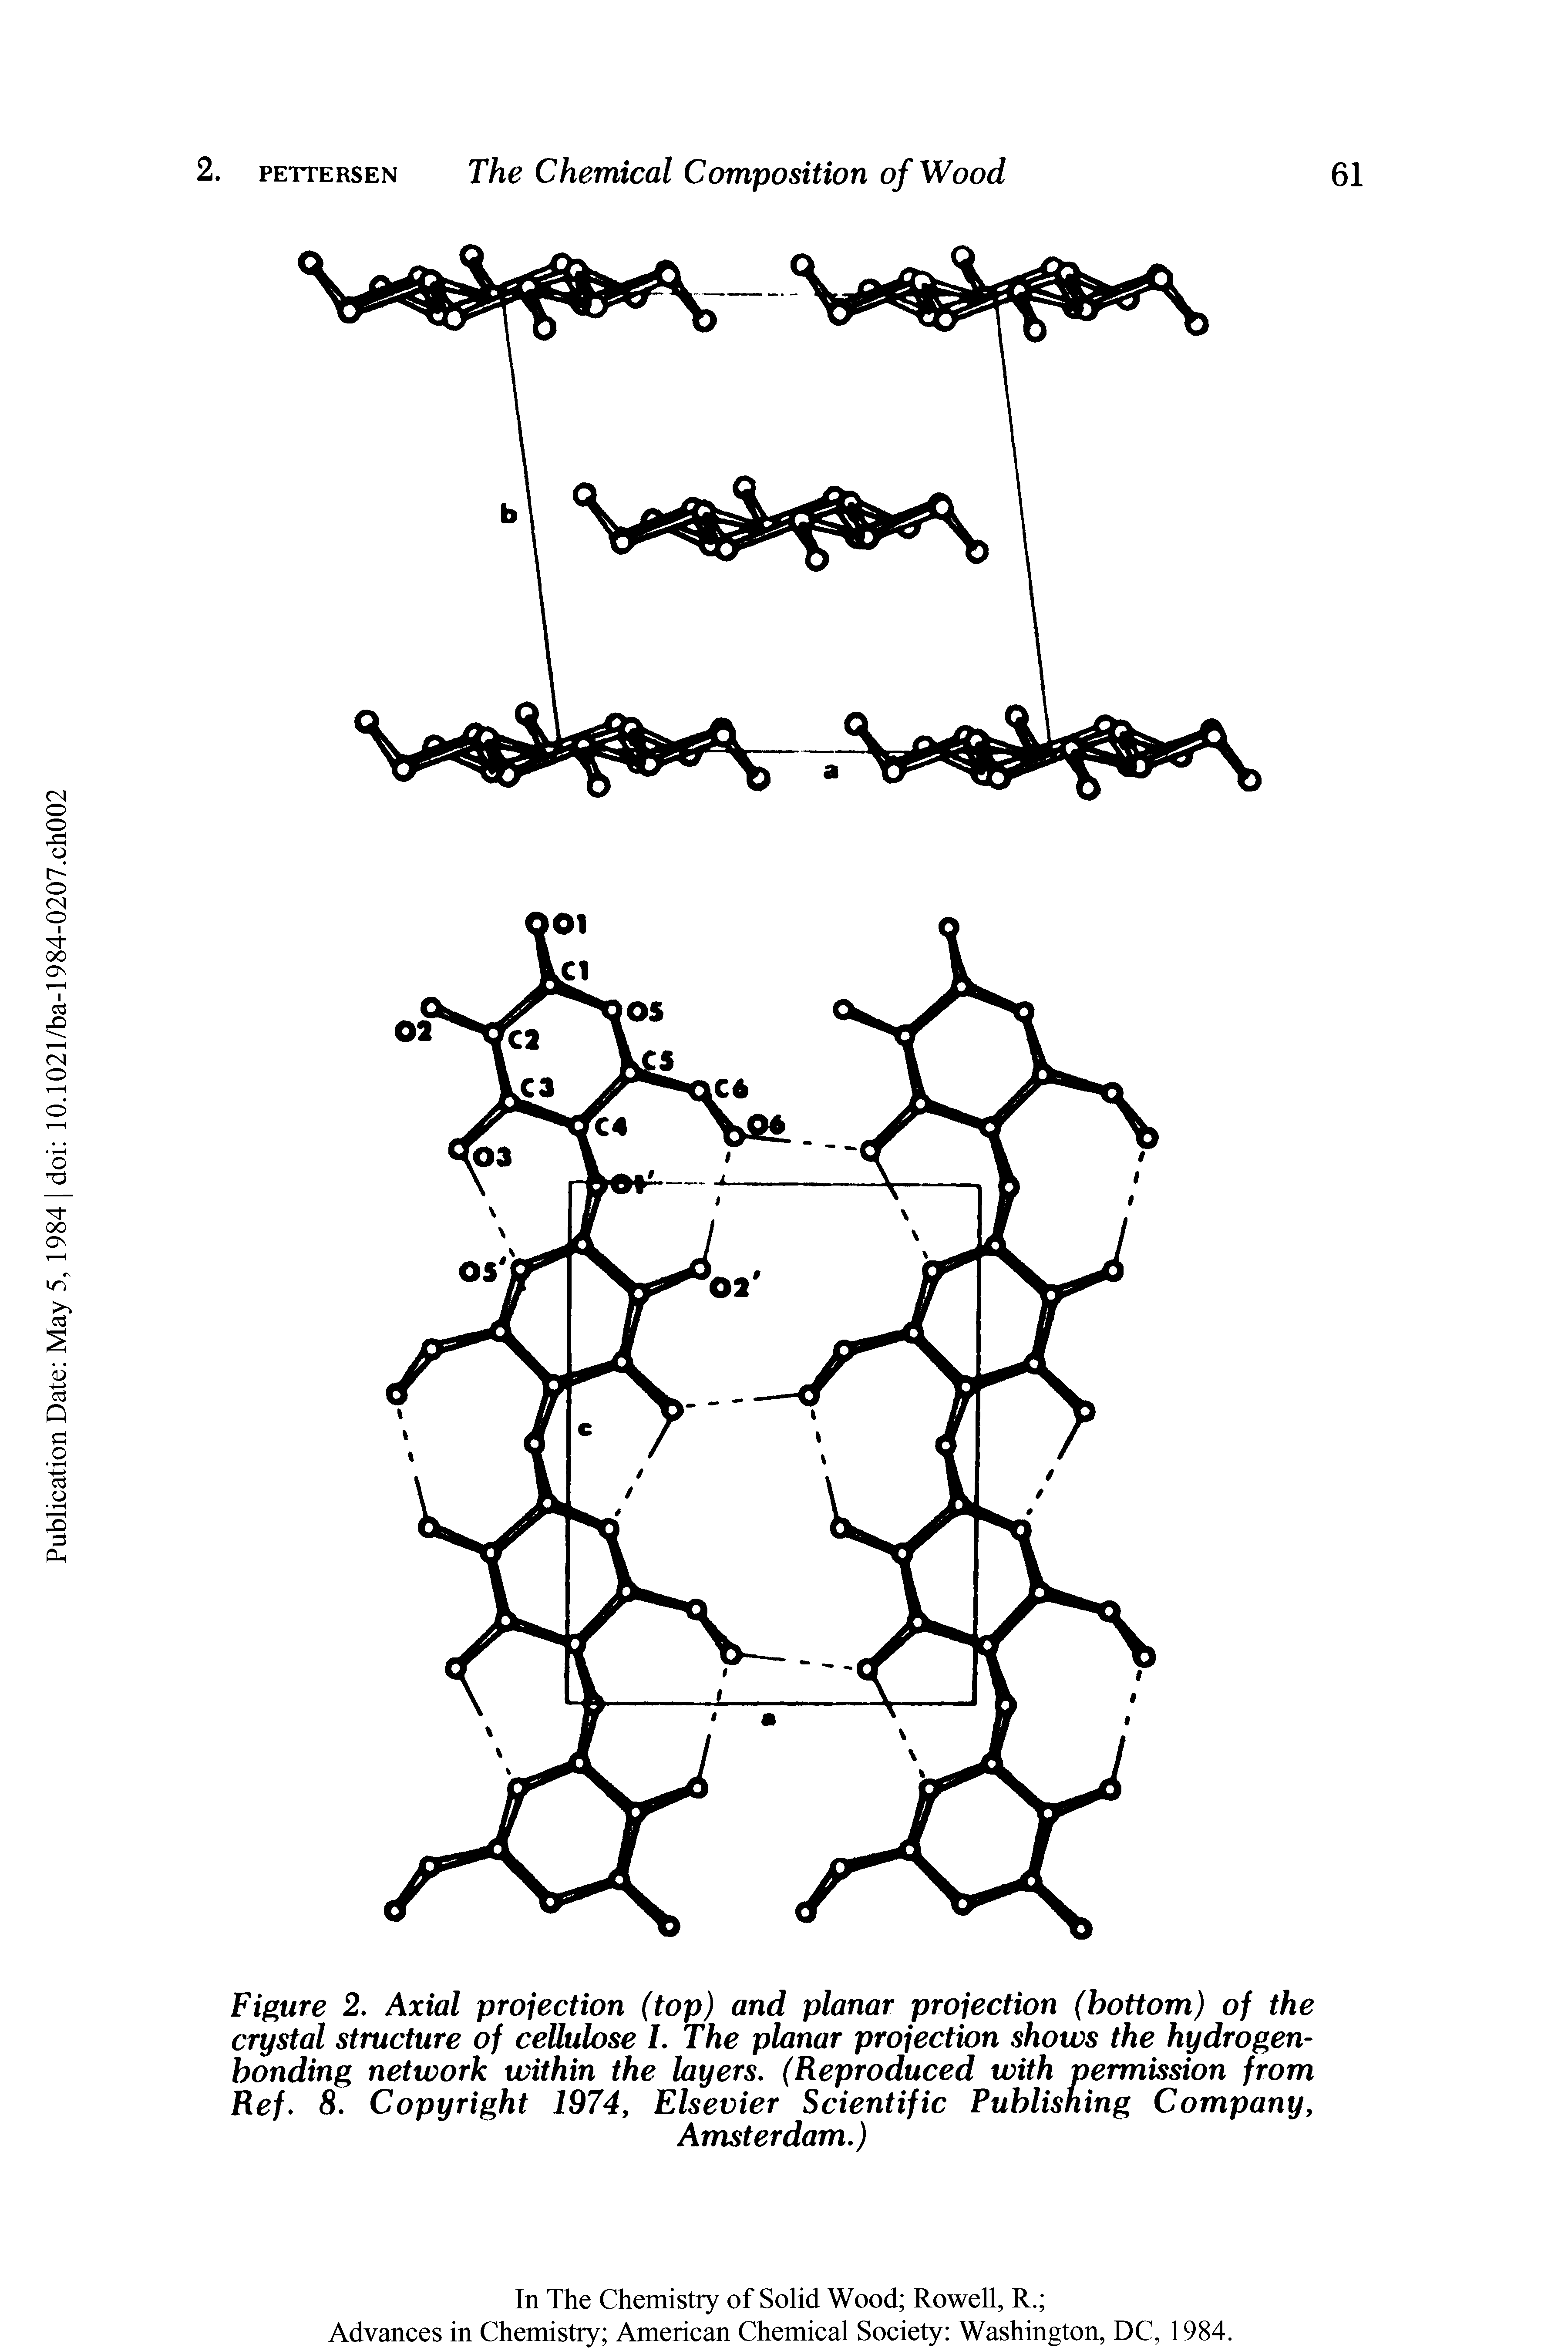 Figure 2. Axial projection (top) and planar projection (bottom) of the crystal structure of cellulose I. The planar projection shows the hydrogen-bonding network within the layers. (Reproduced with permission from Ref. 8. Copyright 1974, Elsevier Scientific Publishing Company,...